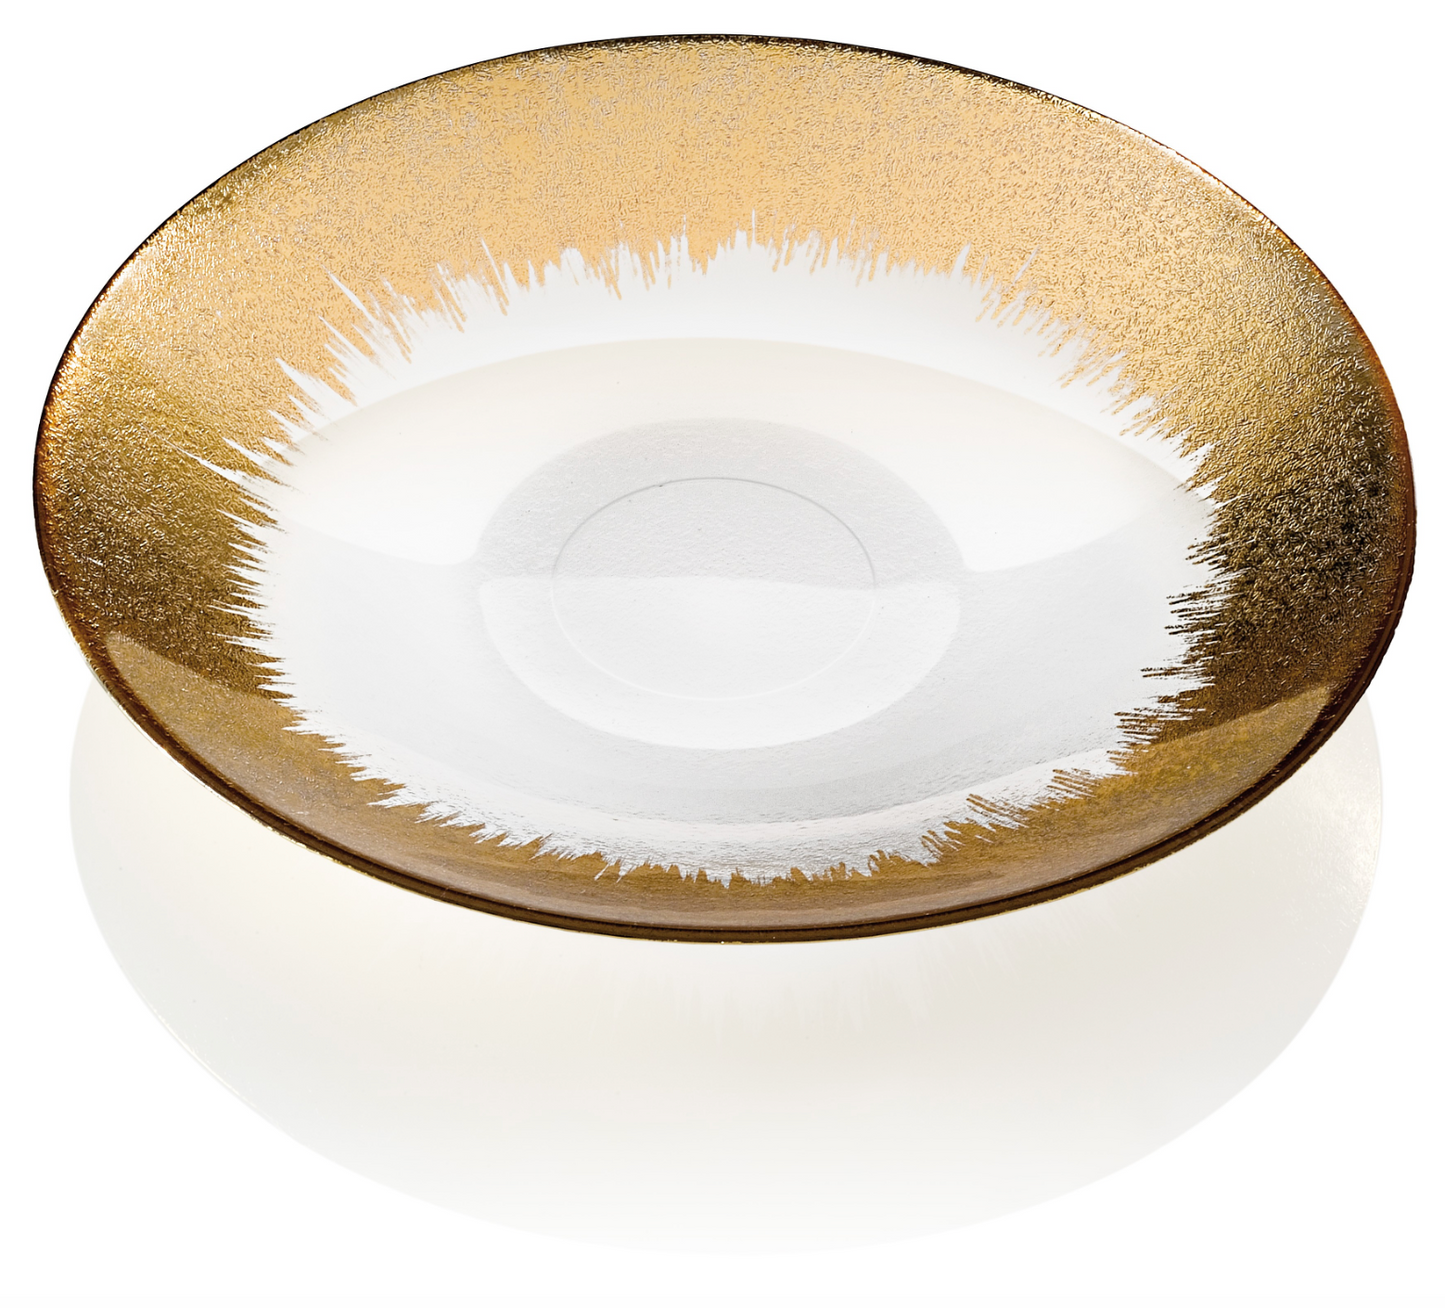 IVV Orizzonte Bowl 41cm Clear Gold Decoration